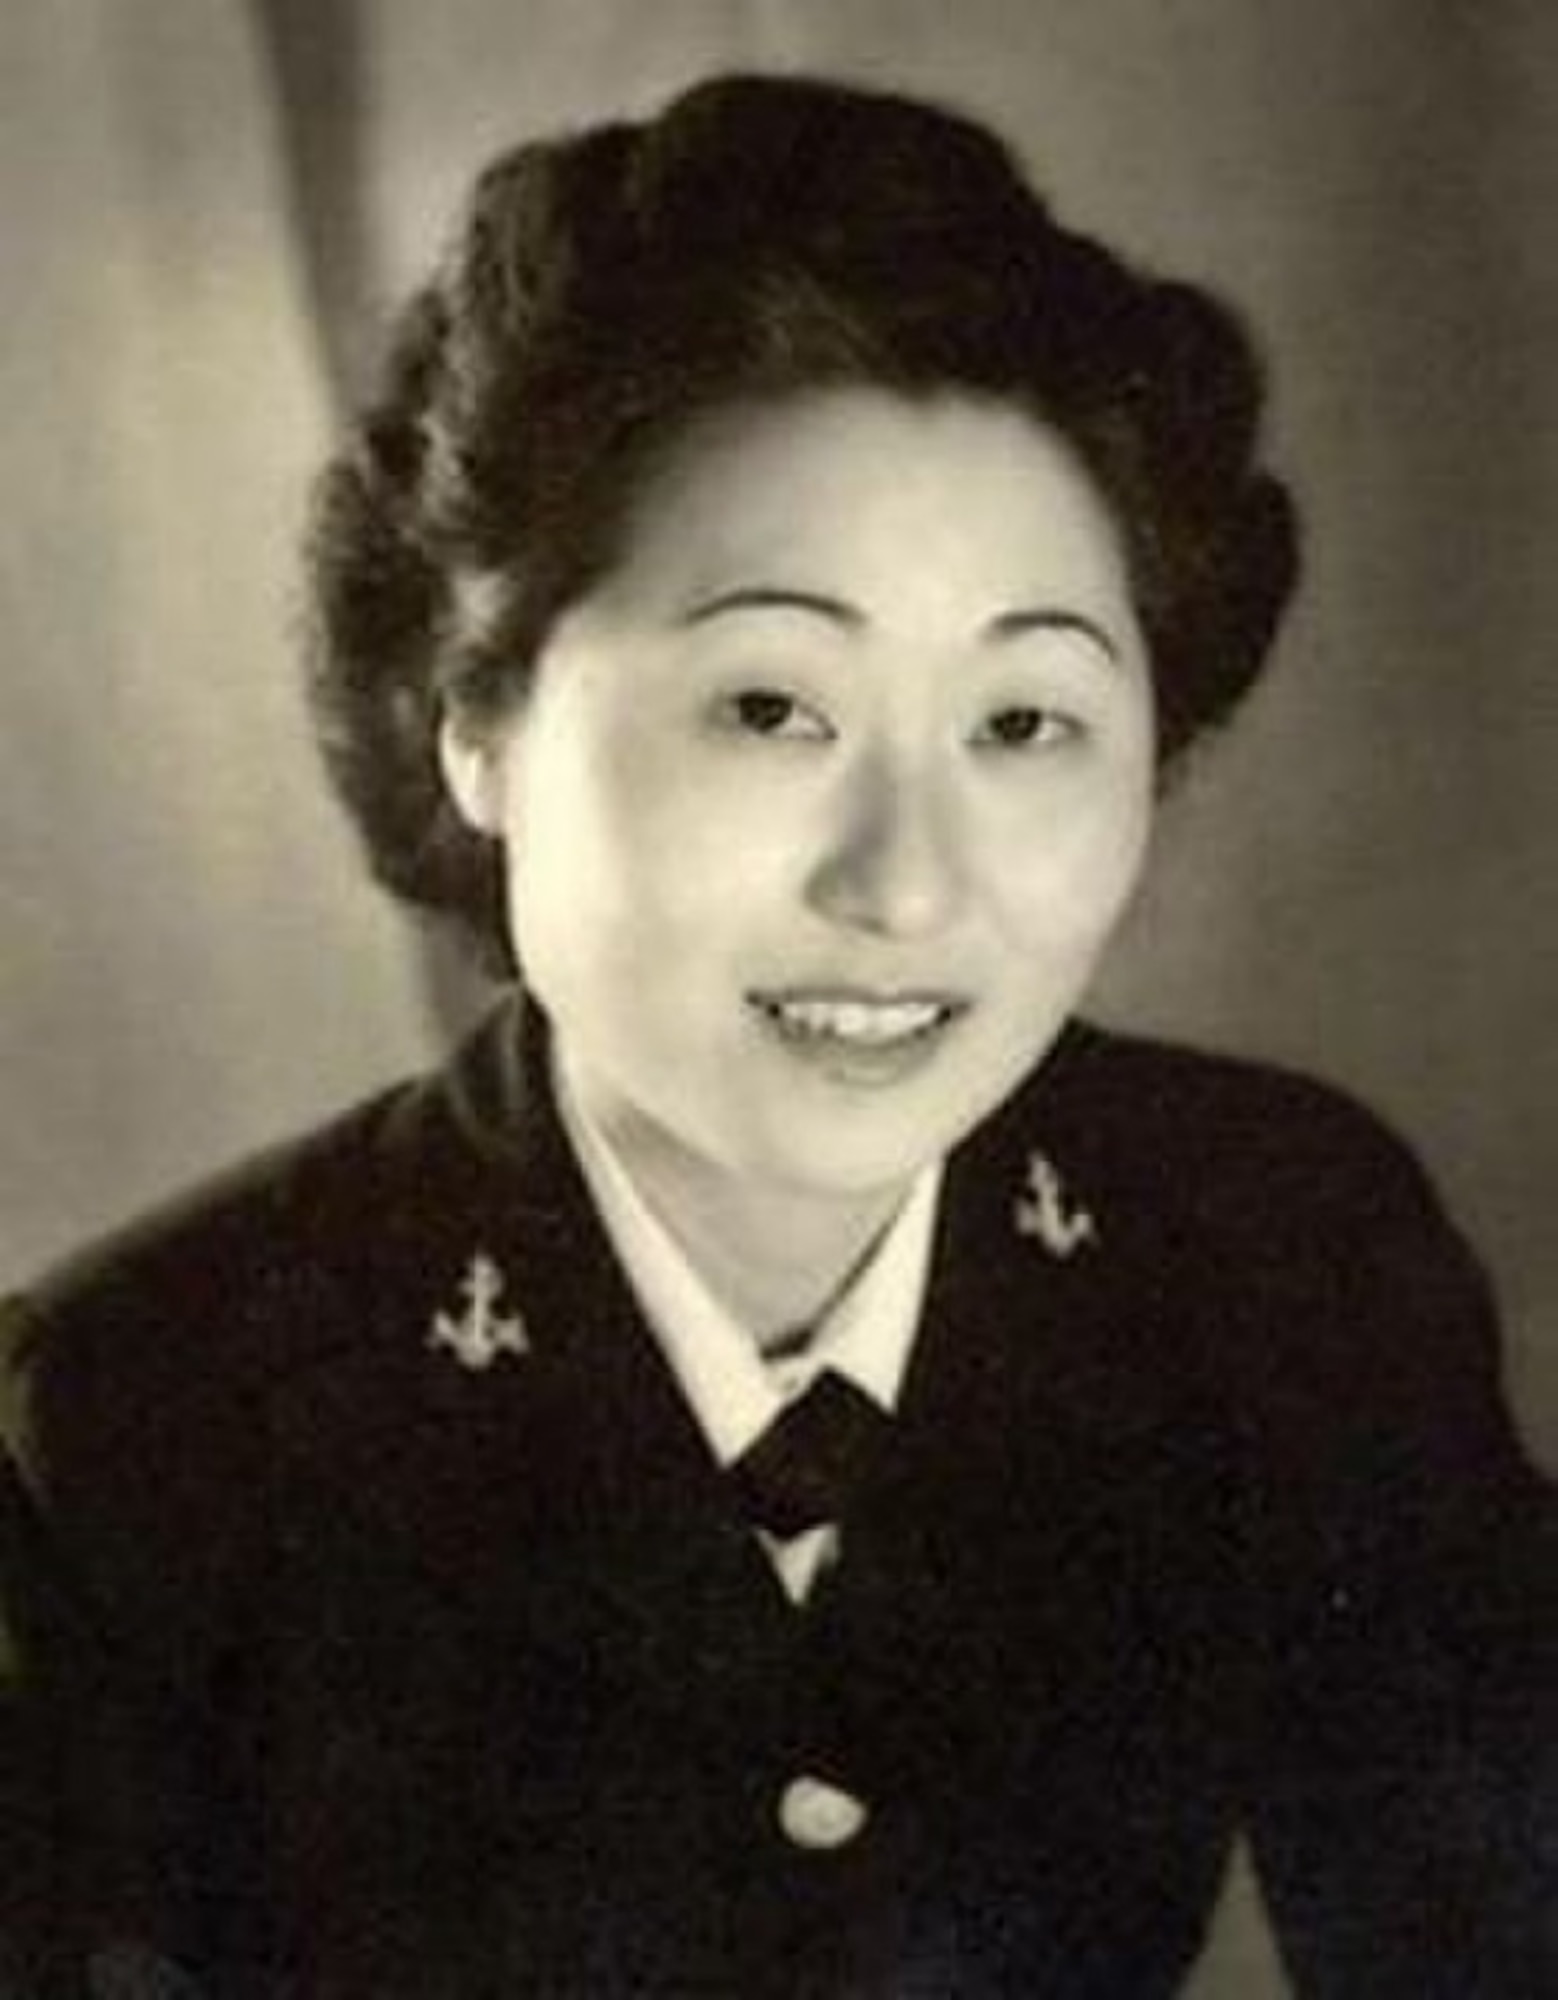 Susan Ahn Cuddy – In 1942, Cuddy was the first Asian-American woman to join the Navy and became the first female to operate flexible-mount or turret-mounted machine guns on an aircraft. (Courtesy photo)